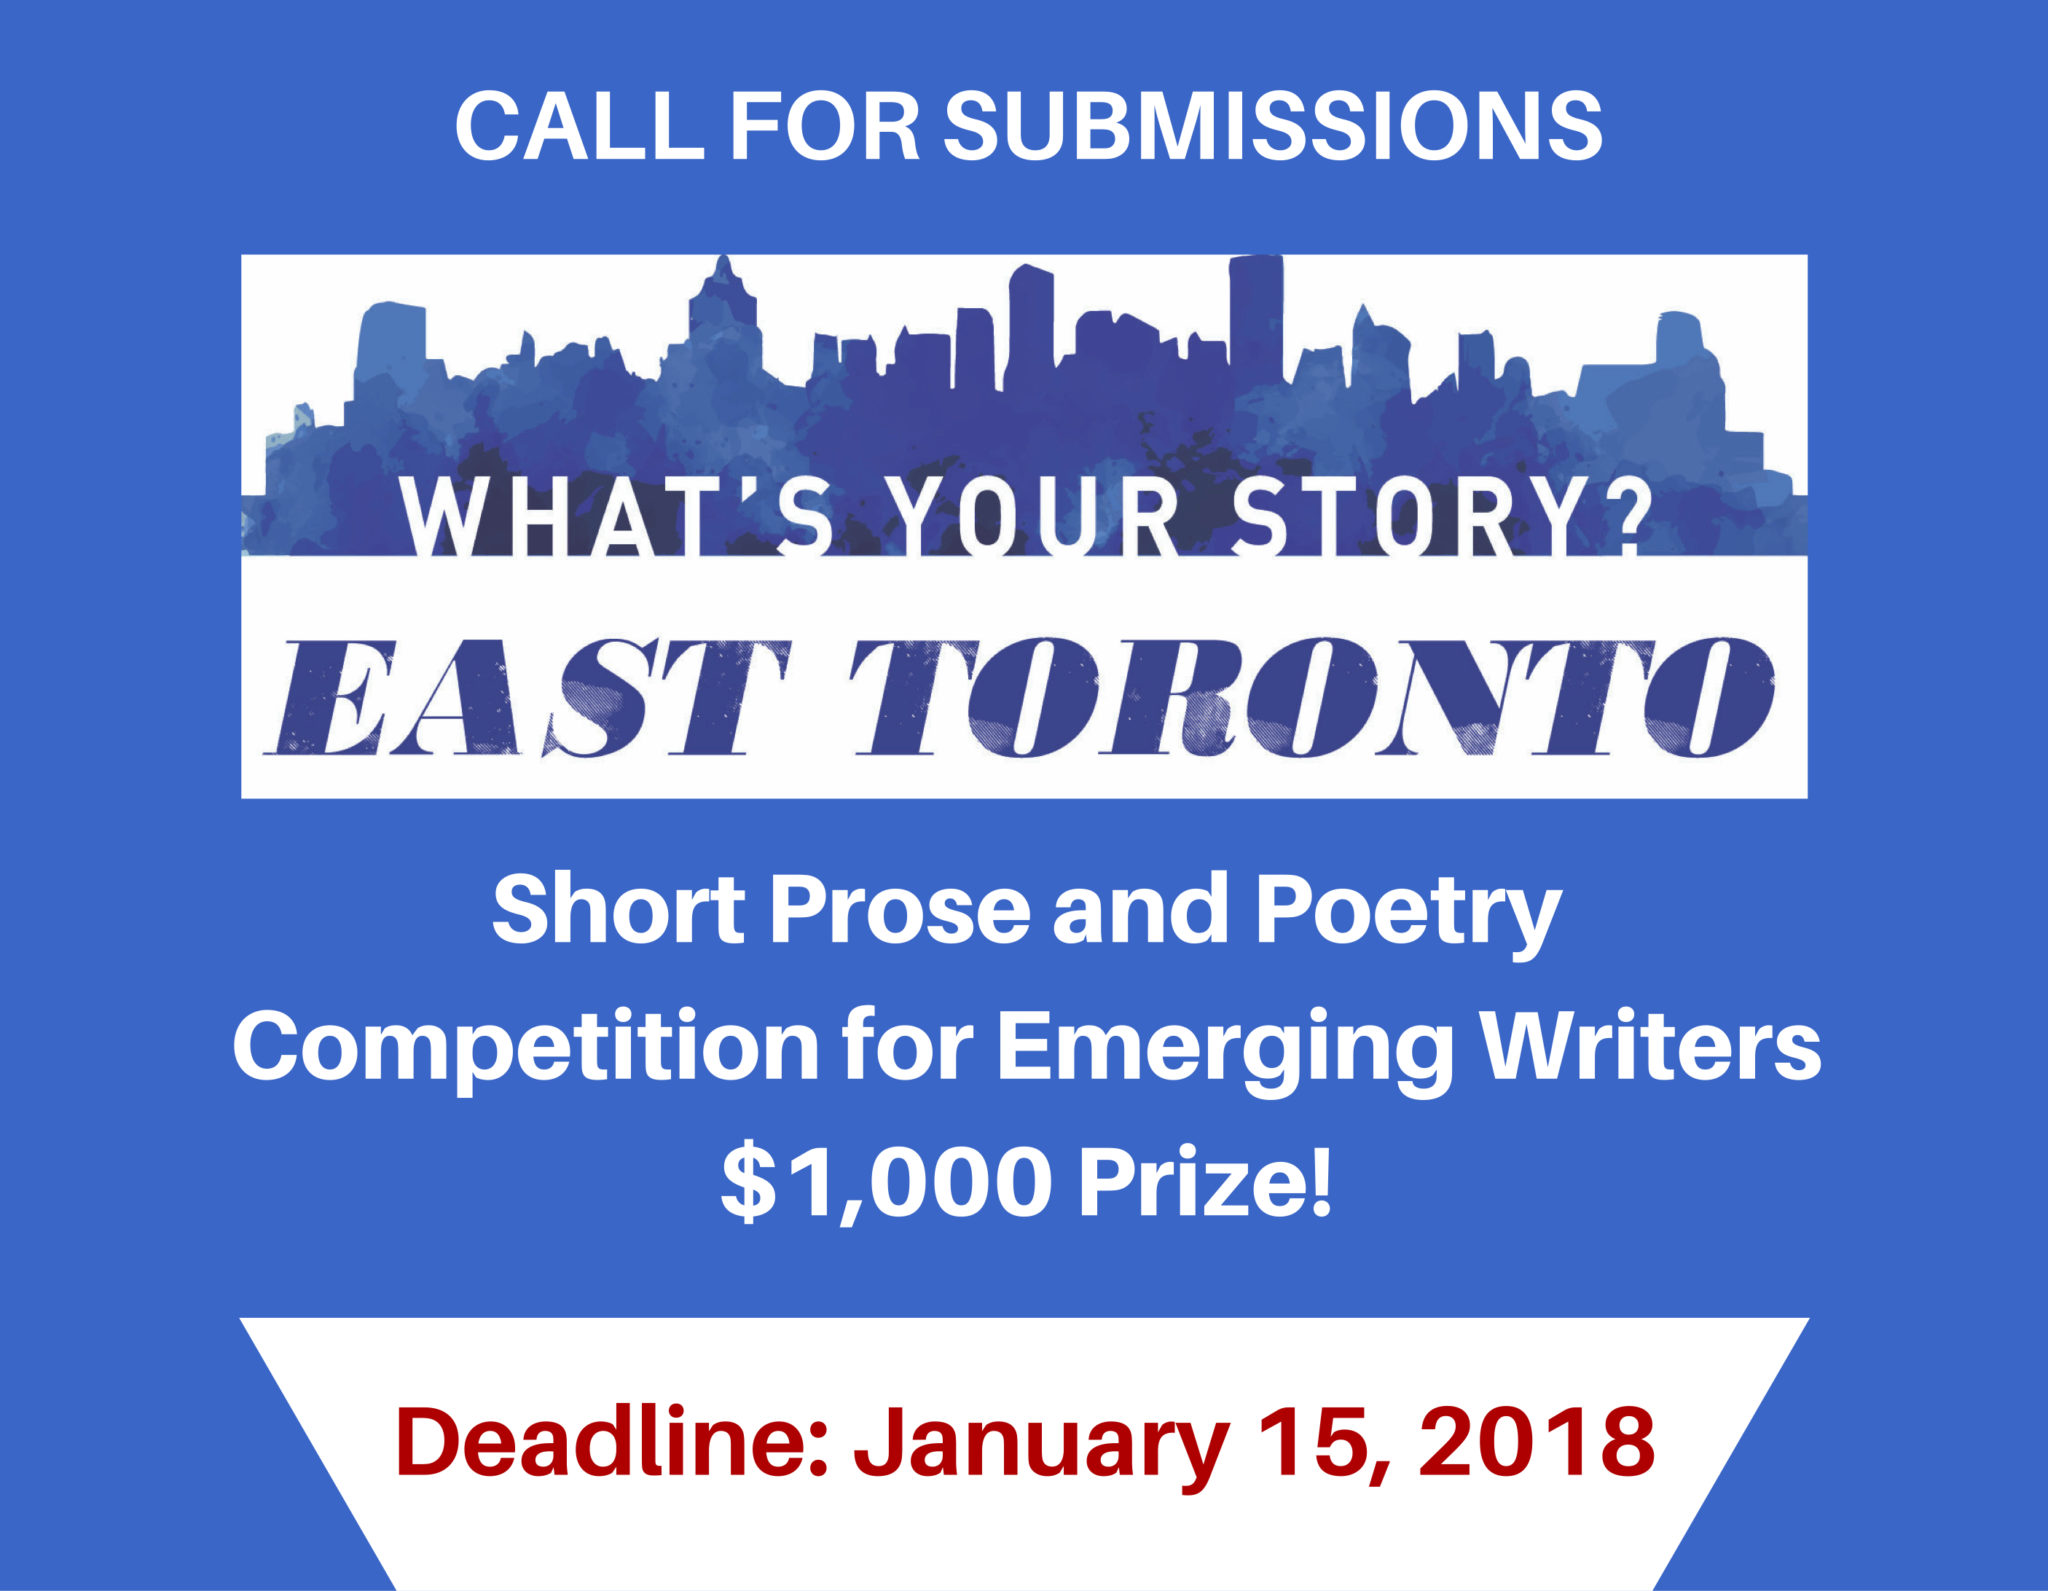 Call For Submissions: What’s Your Story?